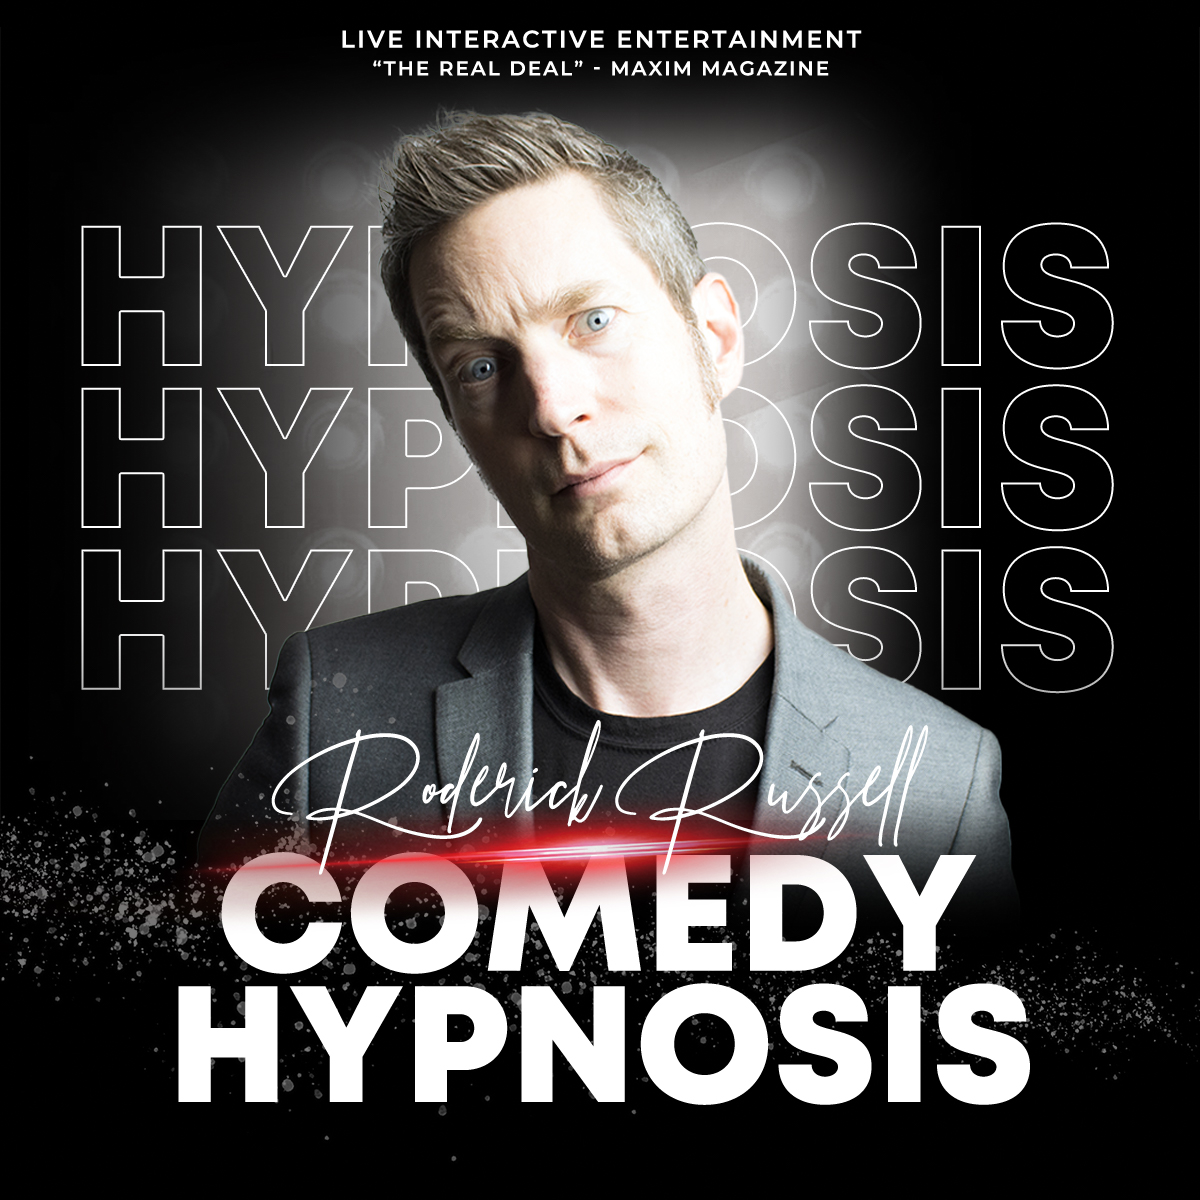 Roderick Russell Comedy Hypnosis